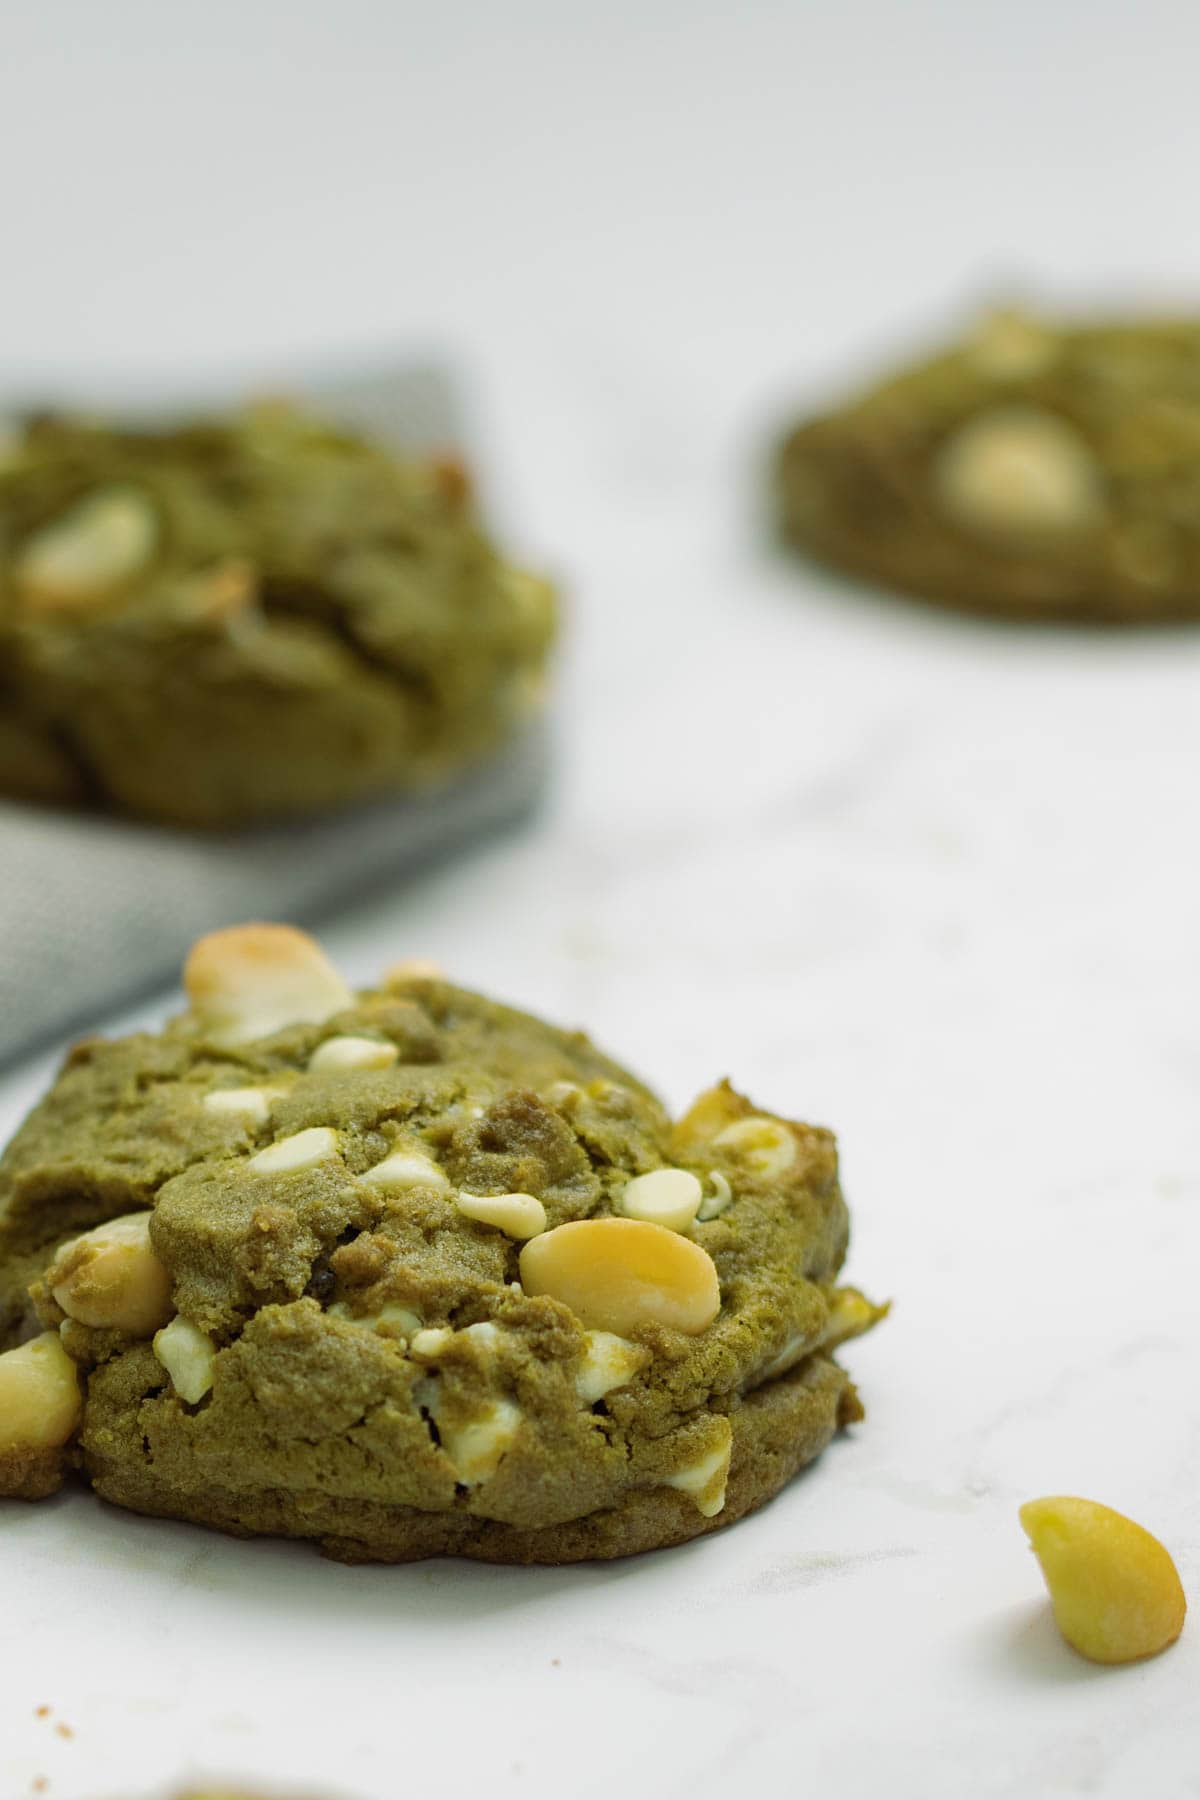 A Matcha Cookie on front left in focus - two cookies blurred out in the back